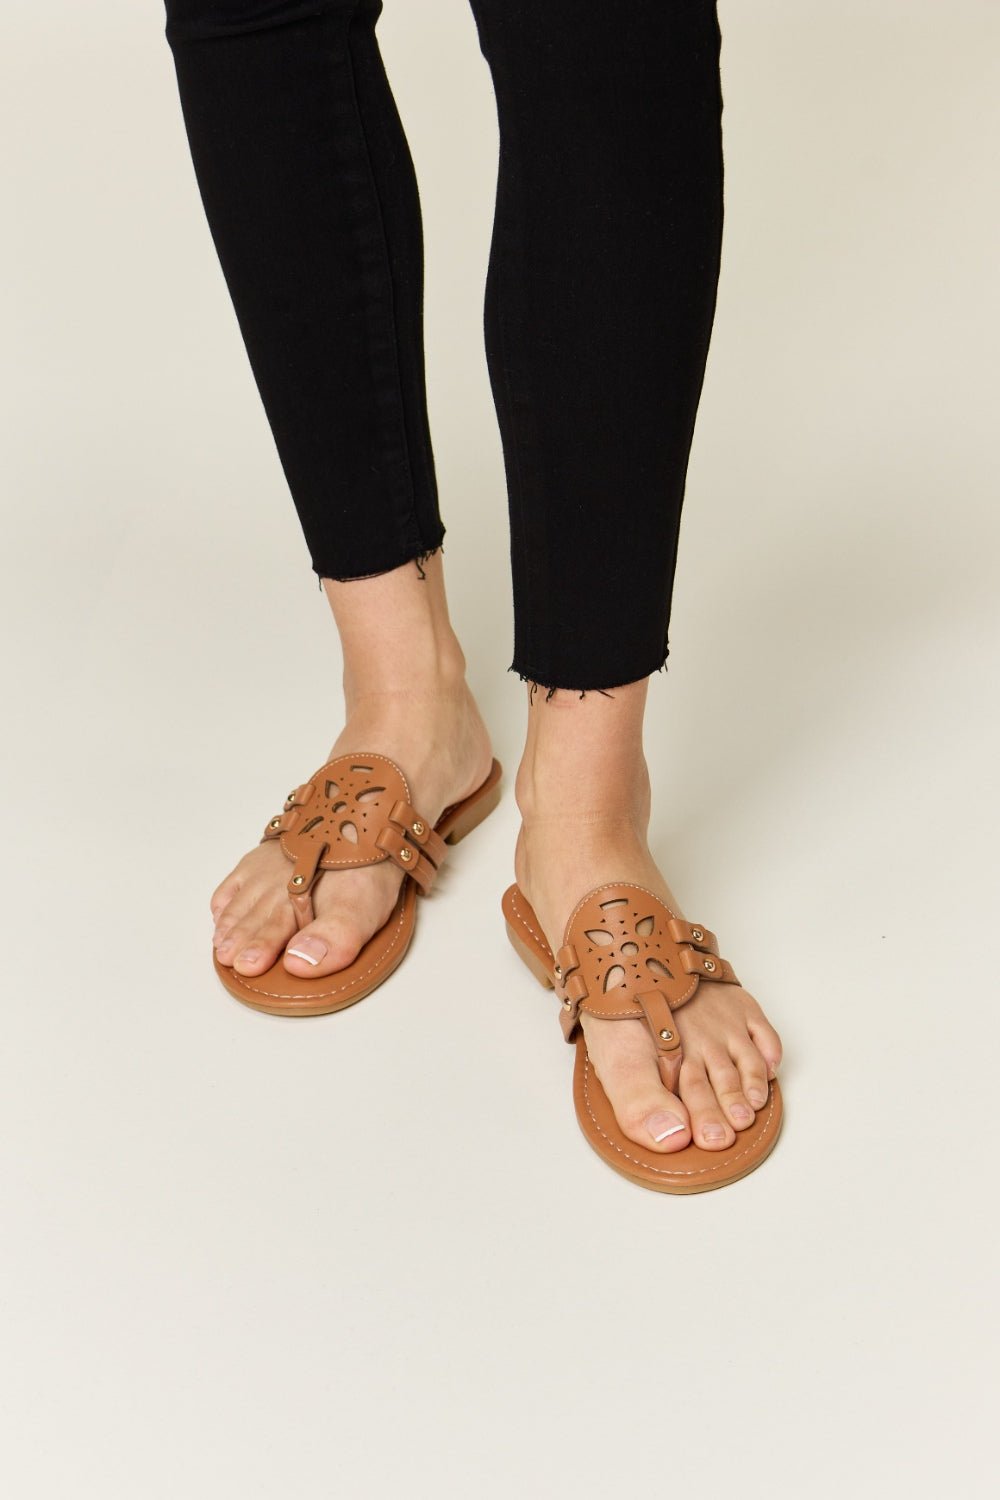 Forever Link Cutout PU Leather Open Toe Sandals - My Threaded Apparel | Online Women's Boutique - sandals